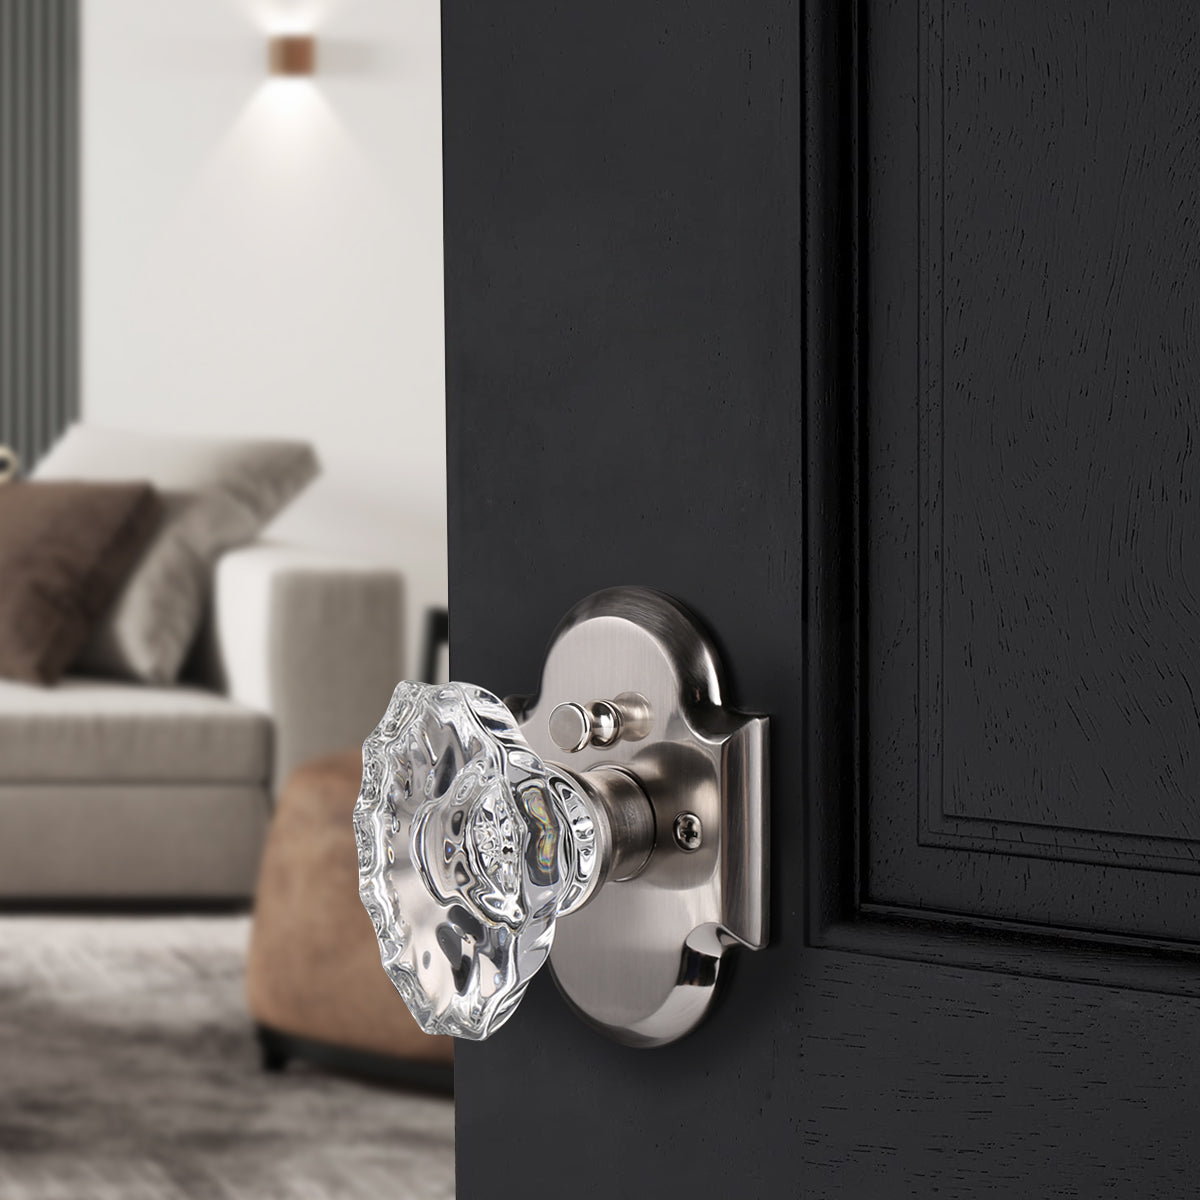 Oval Style Crystal Door Knob with Satin Nickel Arched Rosette, Passage/Privacy Knob DLC21DOSN - Probrico